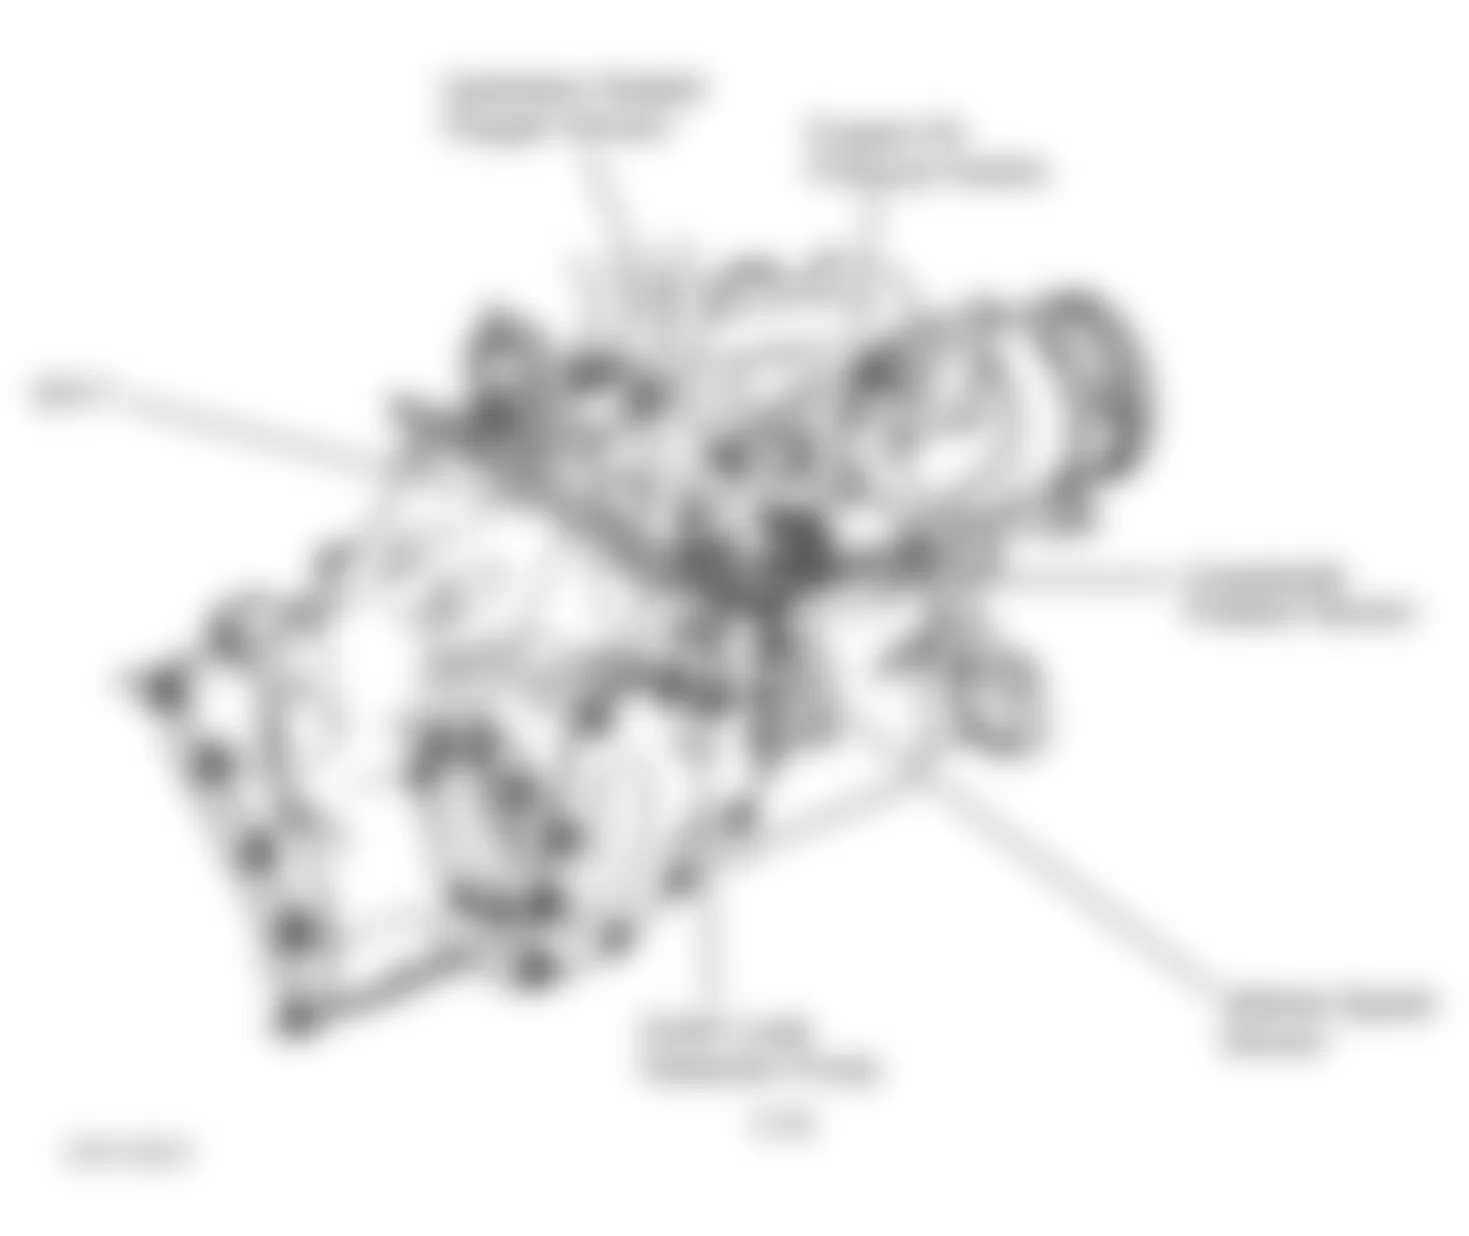 Chrysler Grand Voyager SE 2000 - Component Locations -  Right Side Of Engine (2.4L)